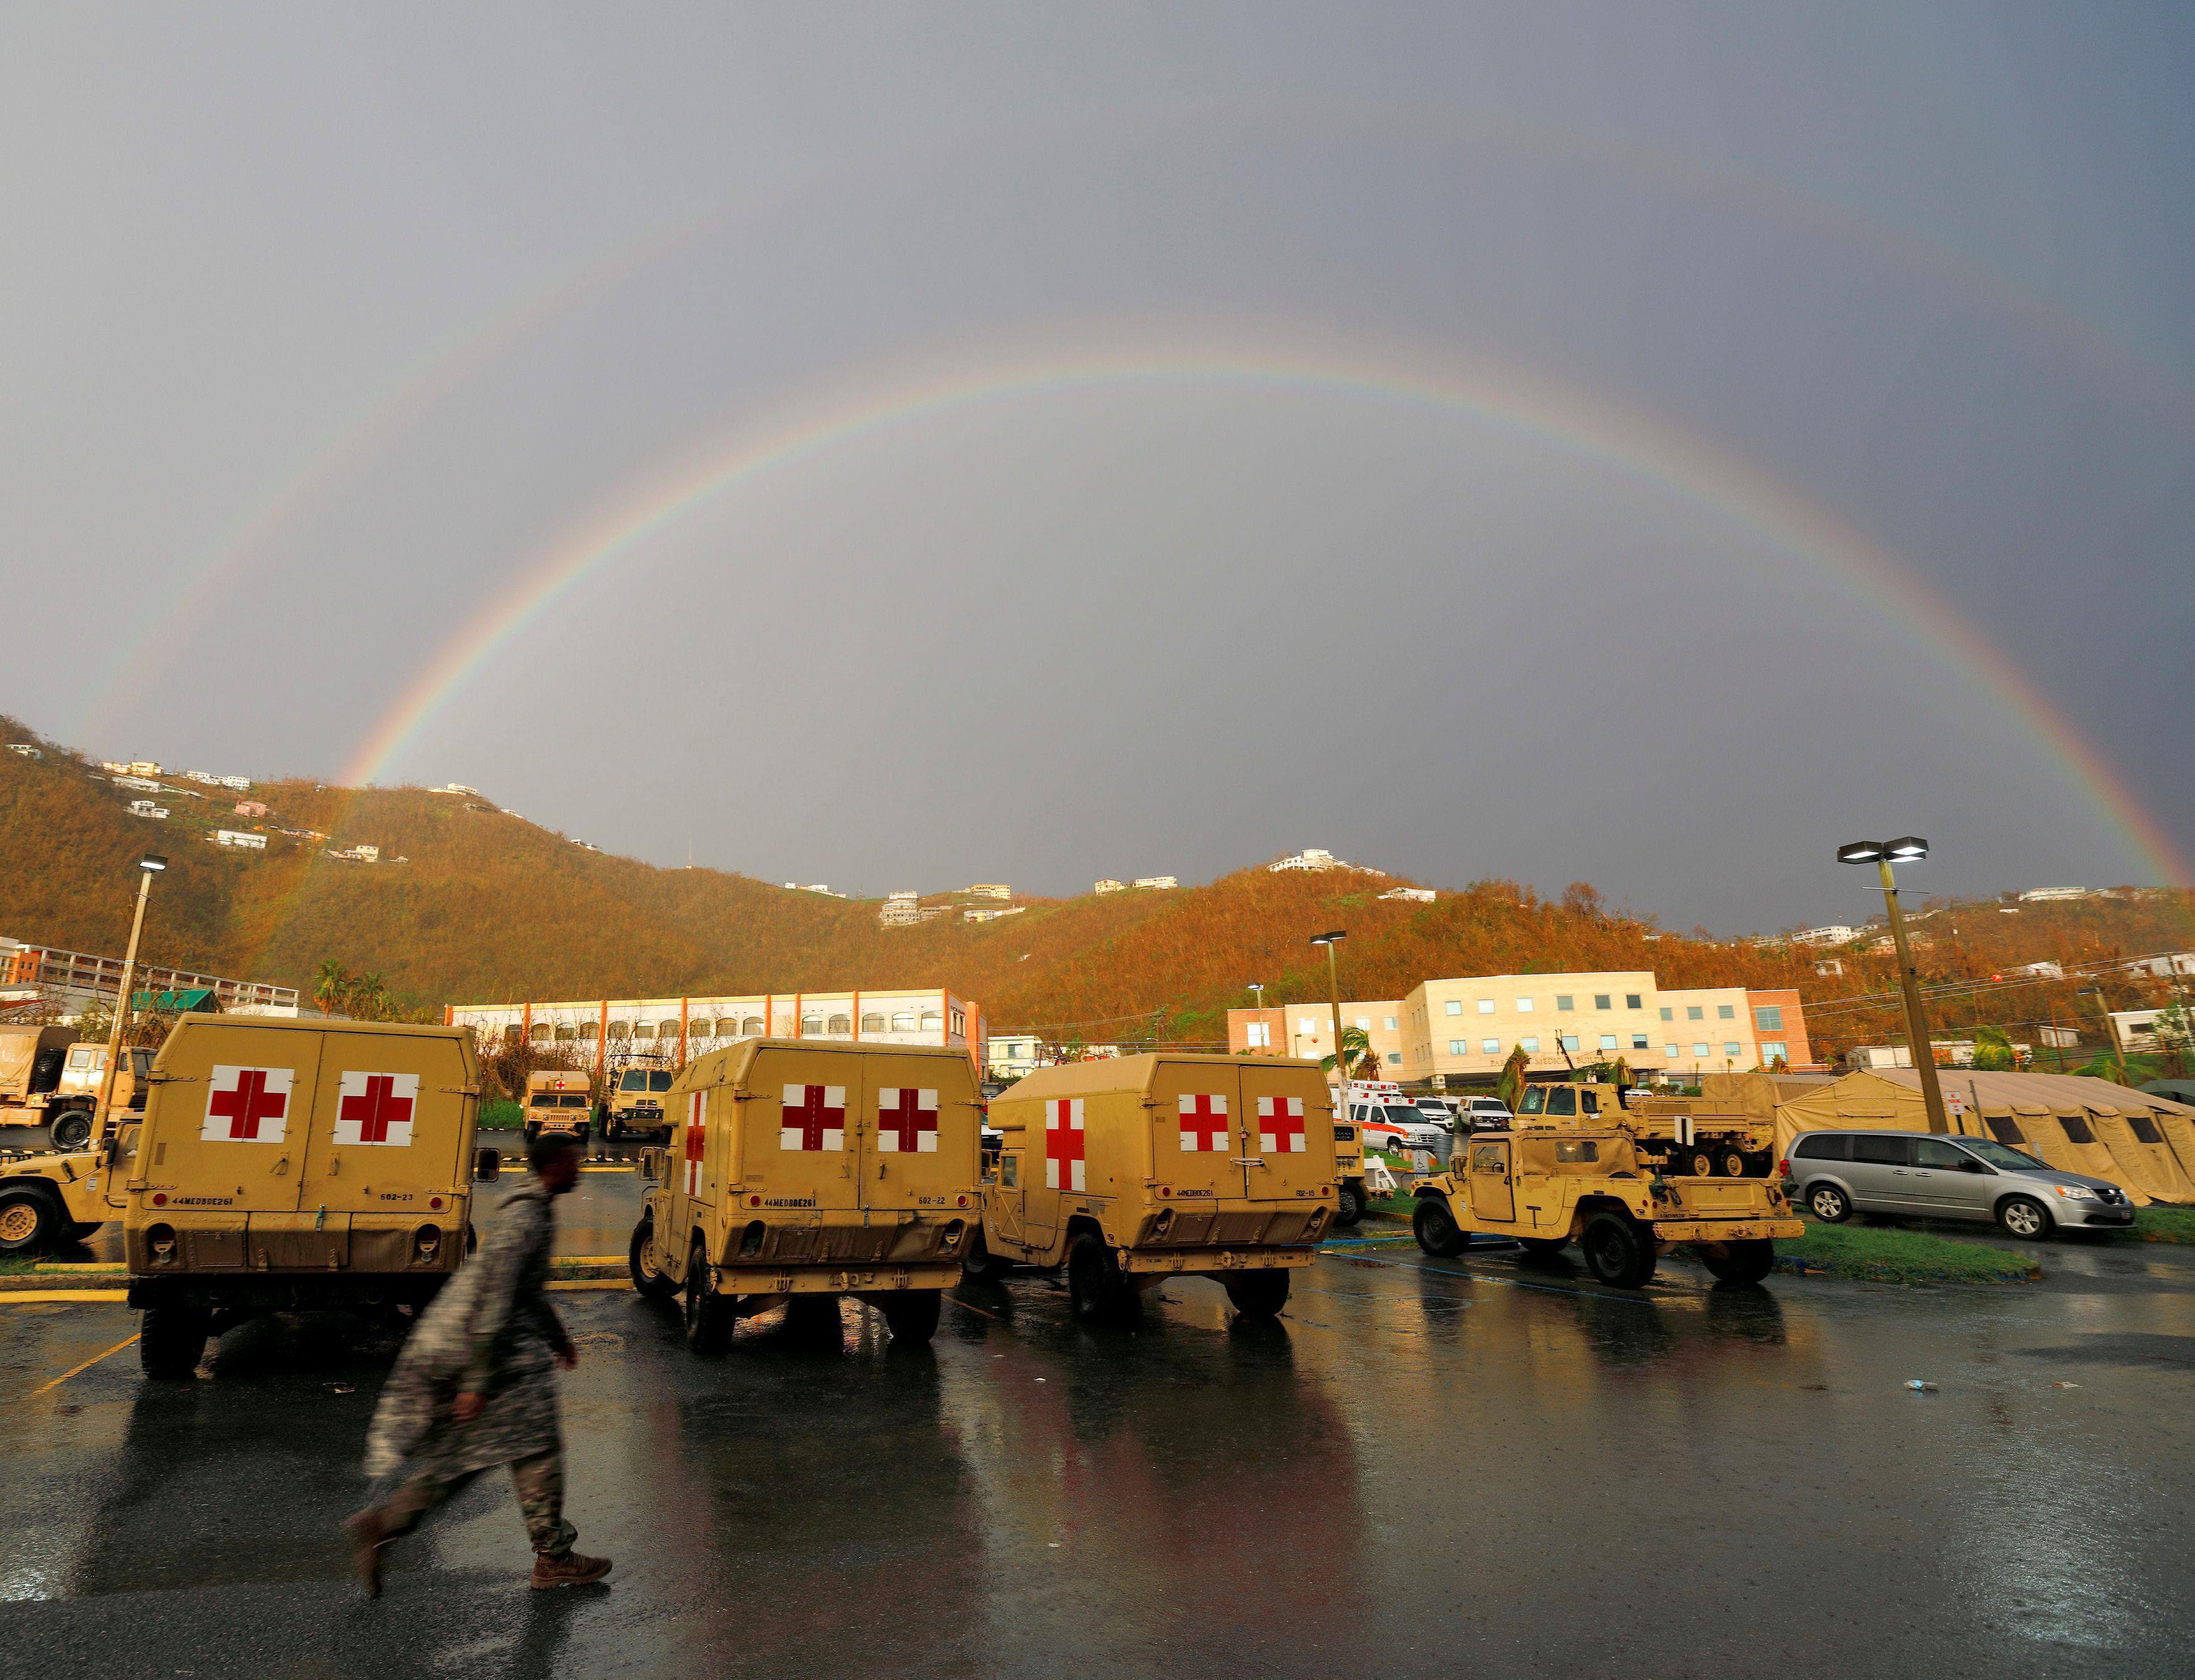 A soldier walks past a row of vehicles while a double rainbow appears in the sky over the U.S. Virgi